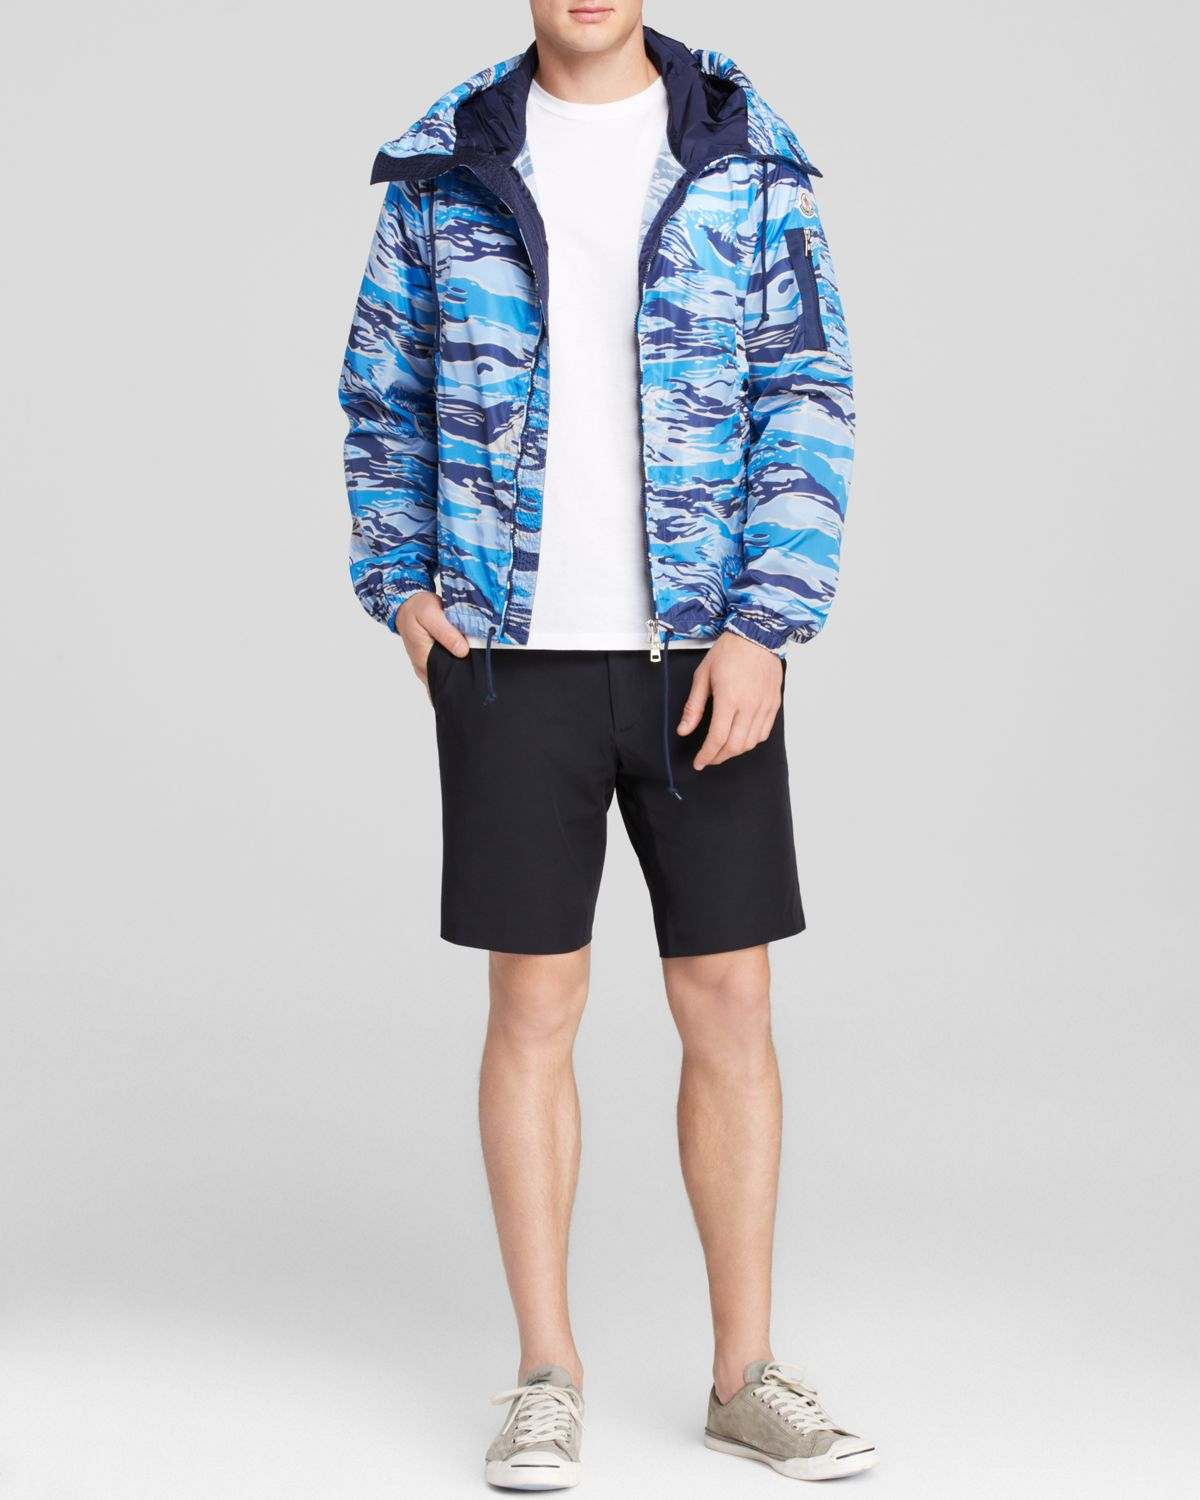 Moncler Synthetic 'fayence' Padded Jacket in Blue Camo (Blue) for Men - Lyst